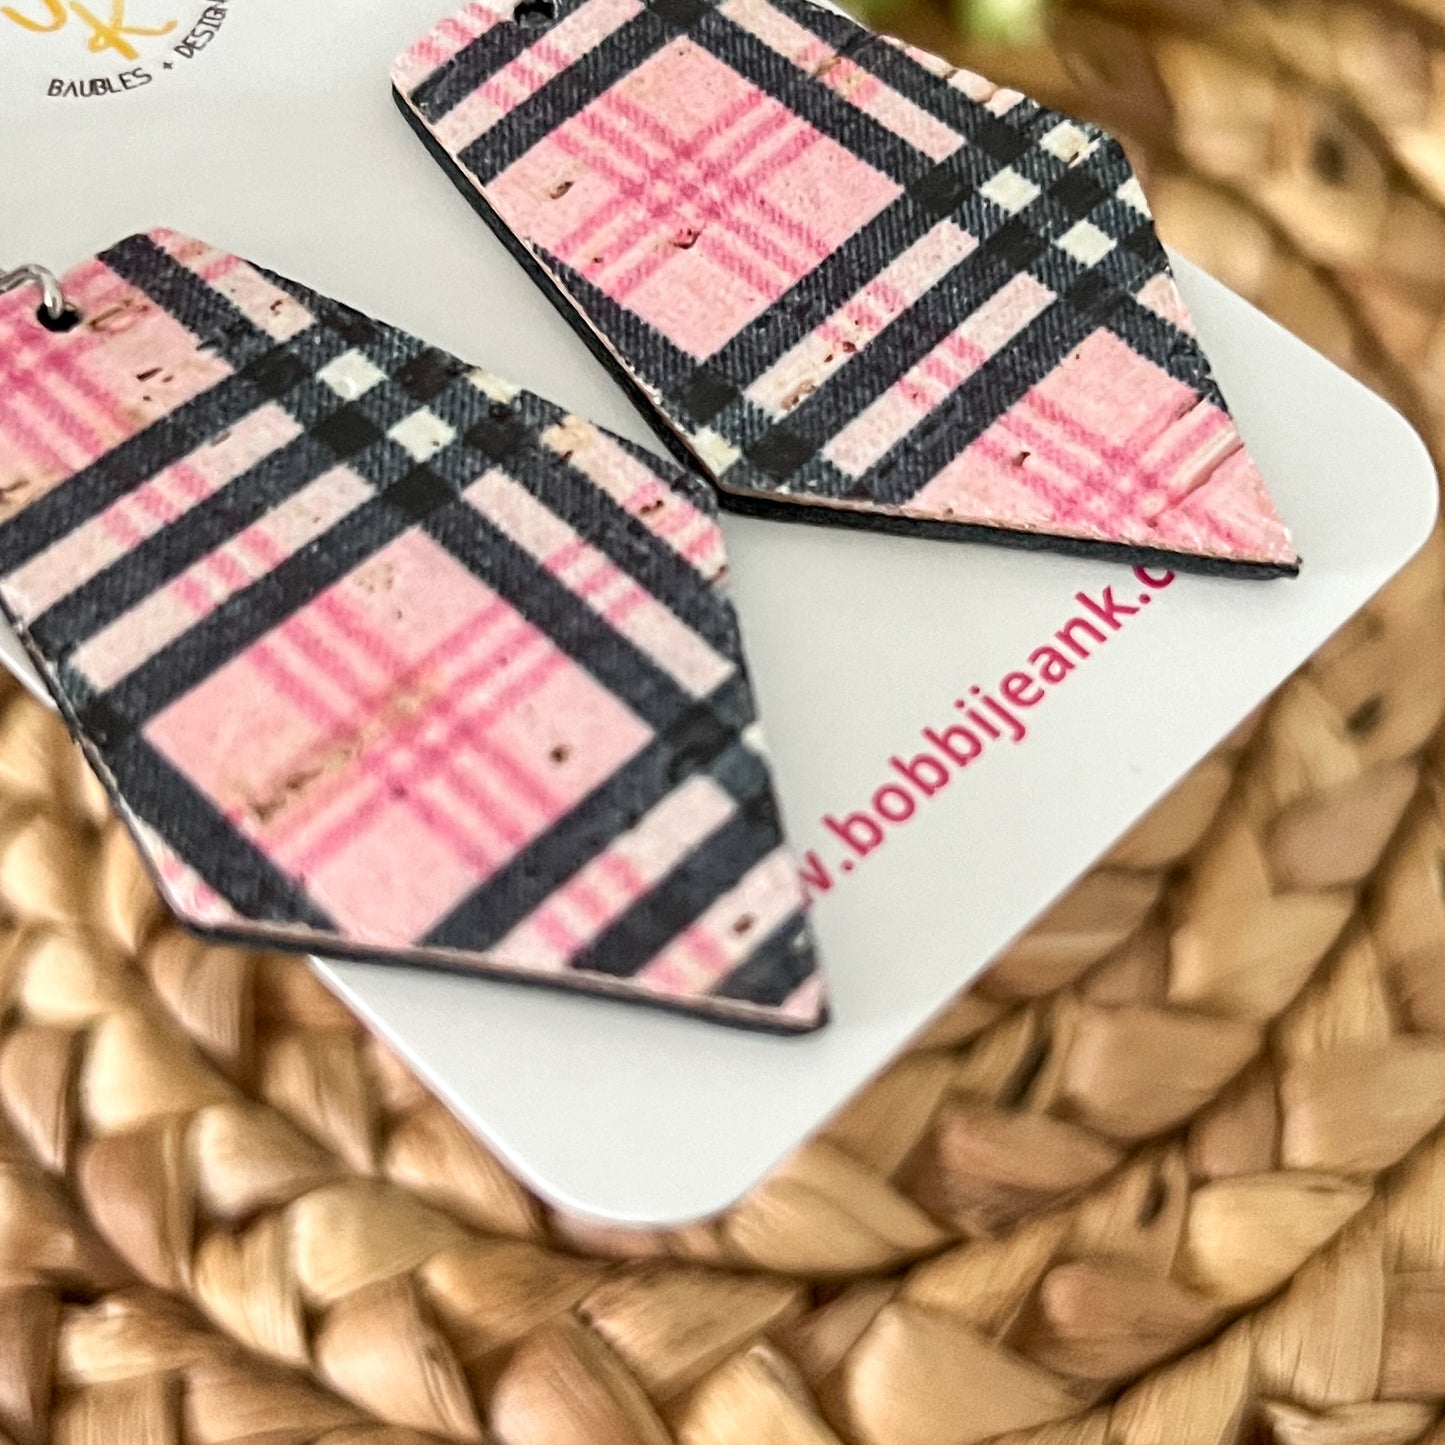 SALE: Pink Plaid Pentagon Cork on Leather Earrings - ONLY ONE LEFT (SLIGHT DEFECT)